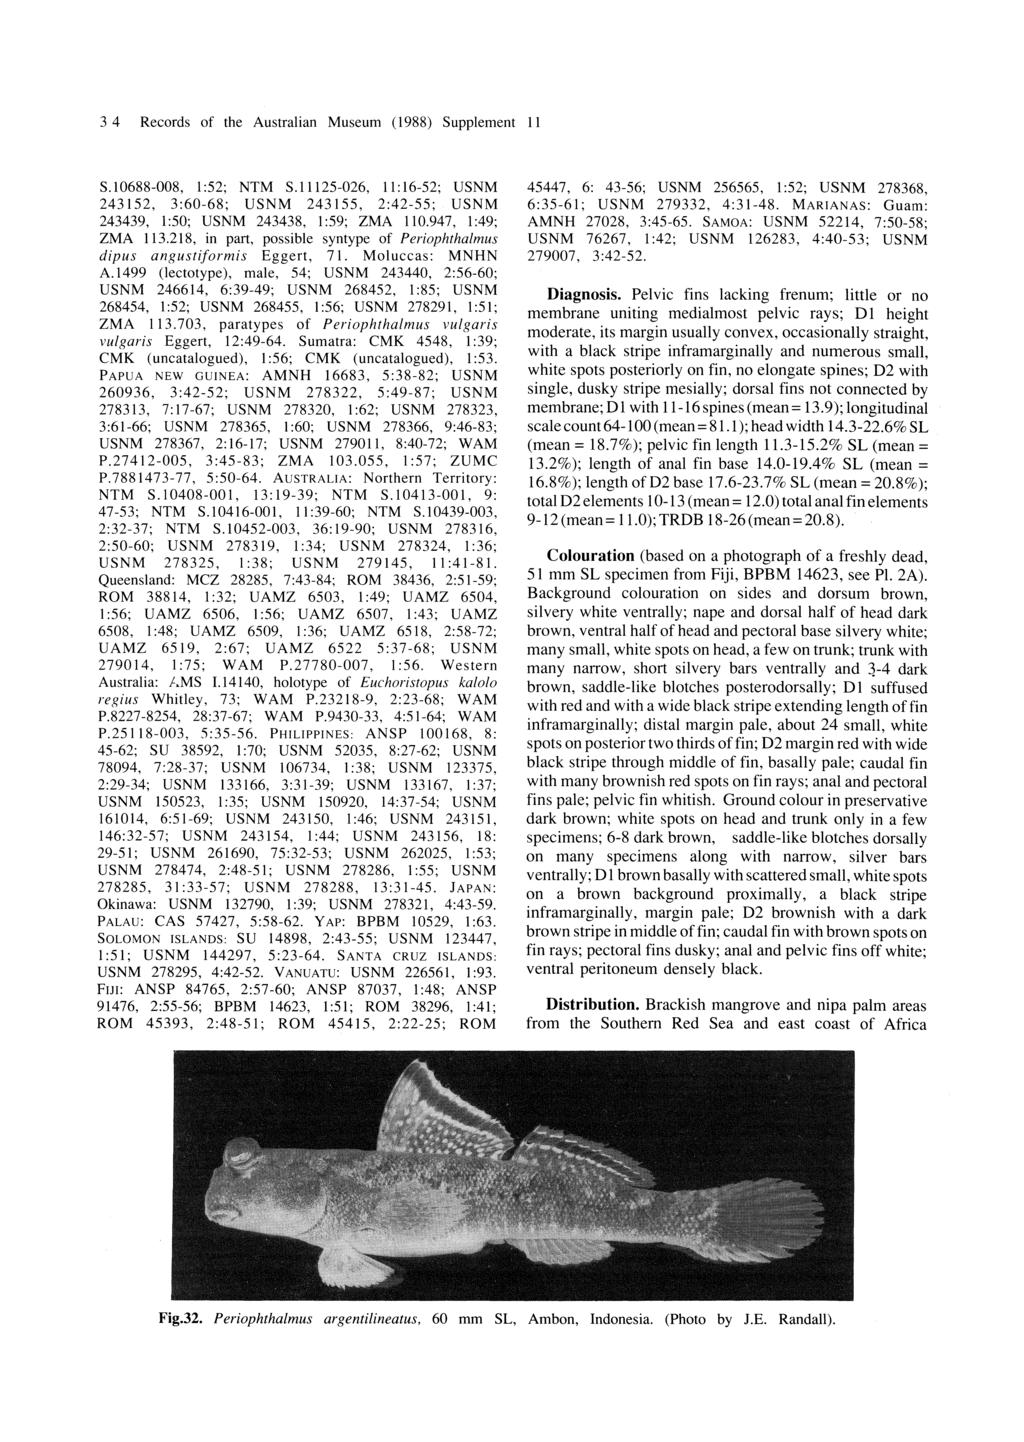 34 Records of the Australian Museum (1988) Supplement 11 S.688-008, 1 :52; NTM S.11125-026, 11: 16-52; USNM 243152, 3:60-68; USNM 243155, 2:42-55; USNM 243439, 1:50; USNM 243438, 1:59; ZMA 1.